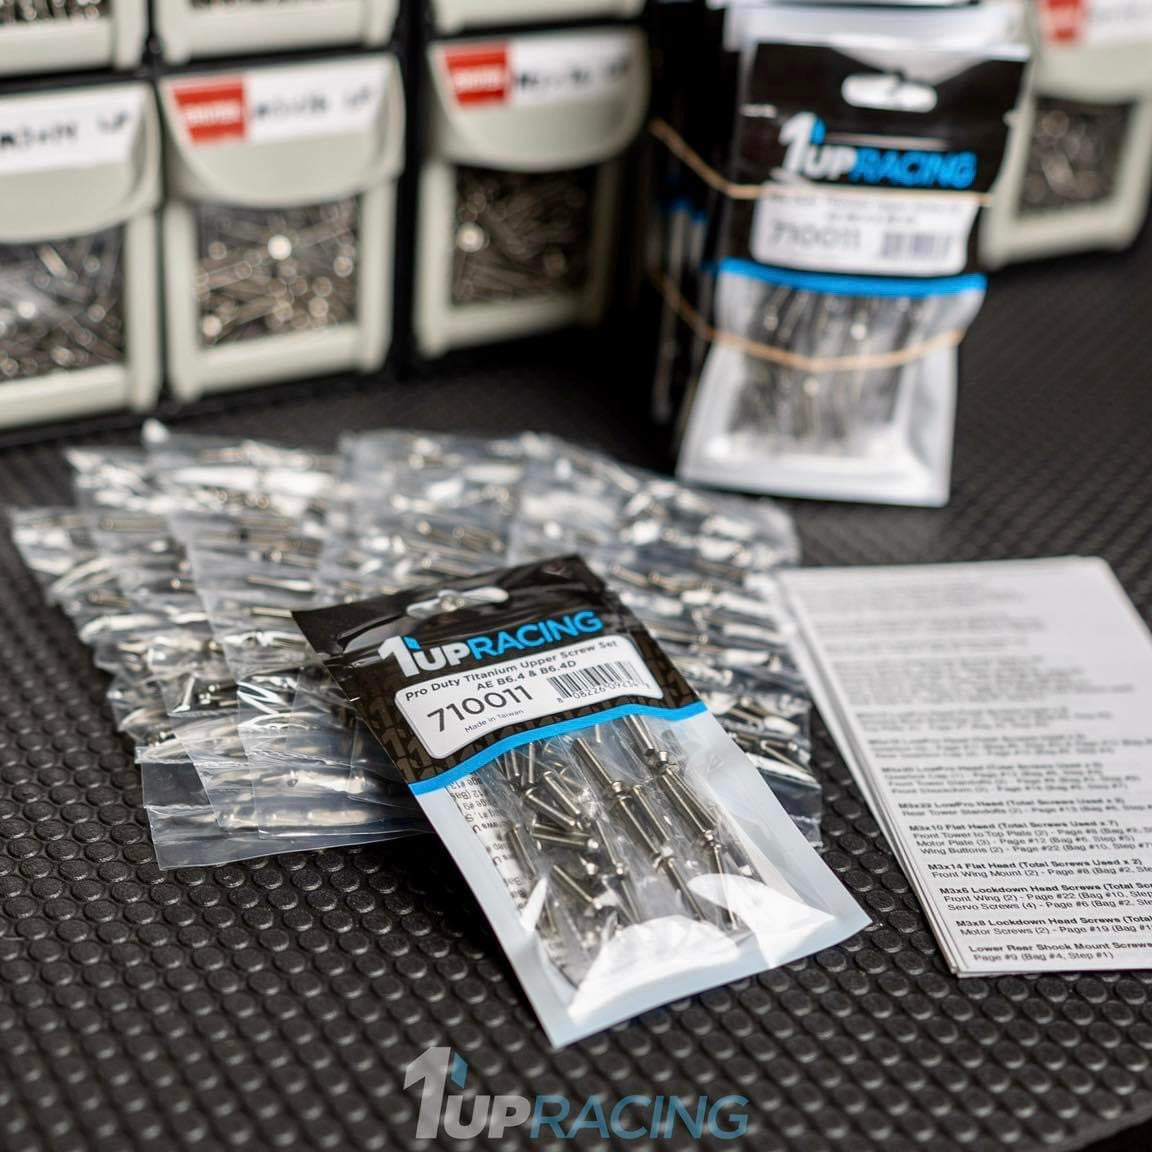 Pro Duty Titanium Screw Sets Restocked and now Available